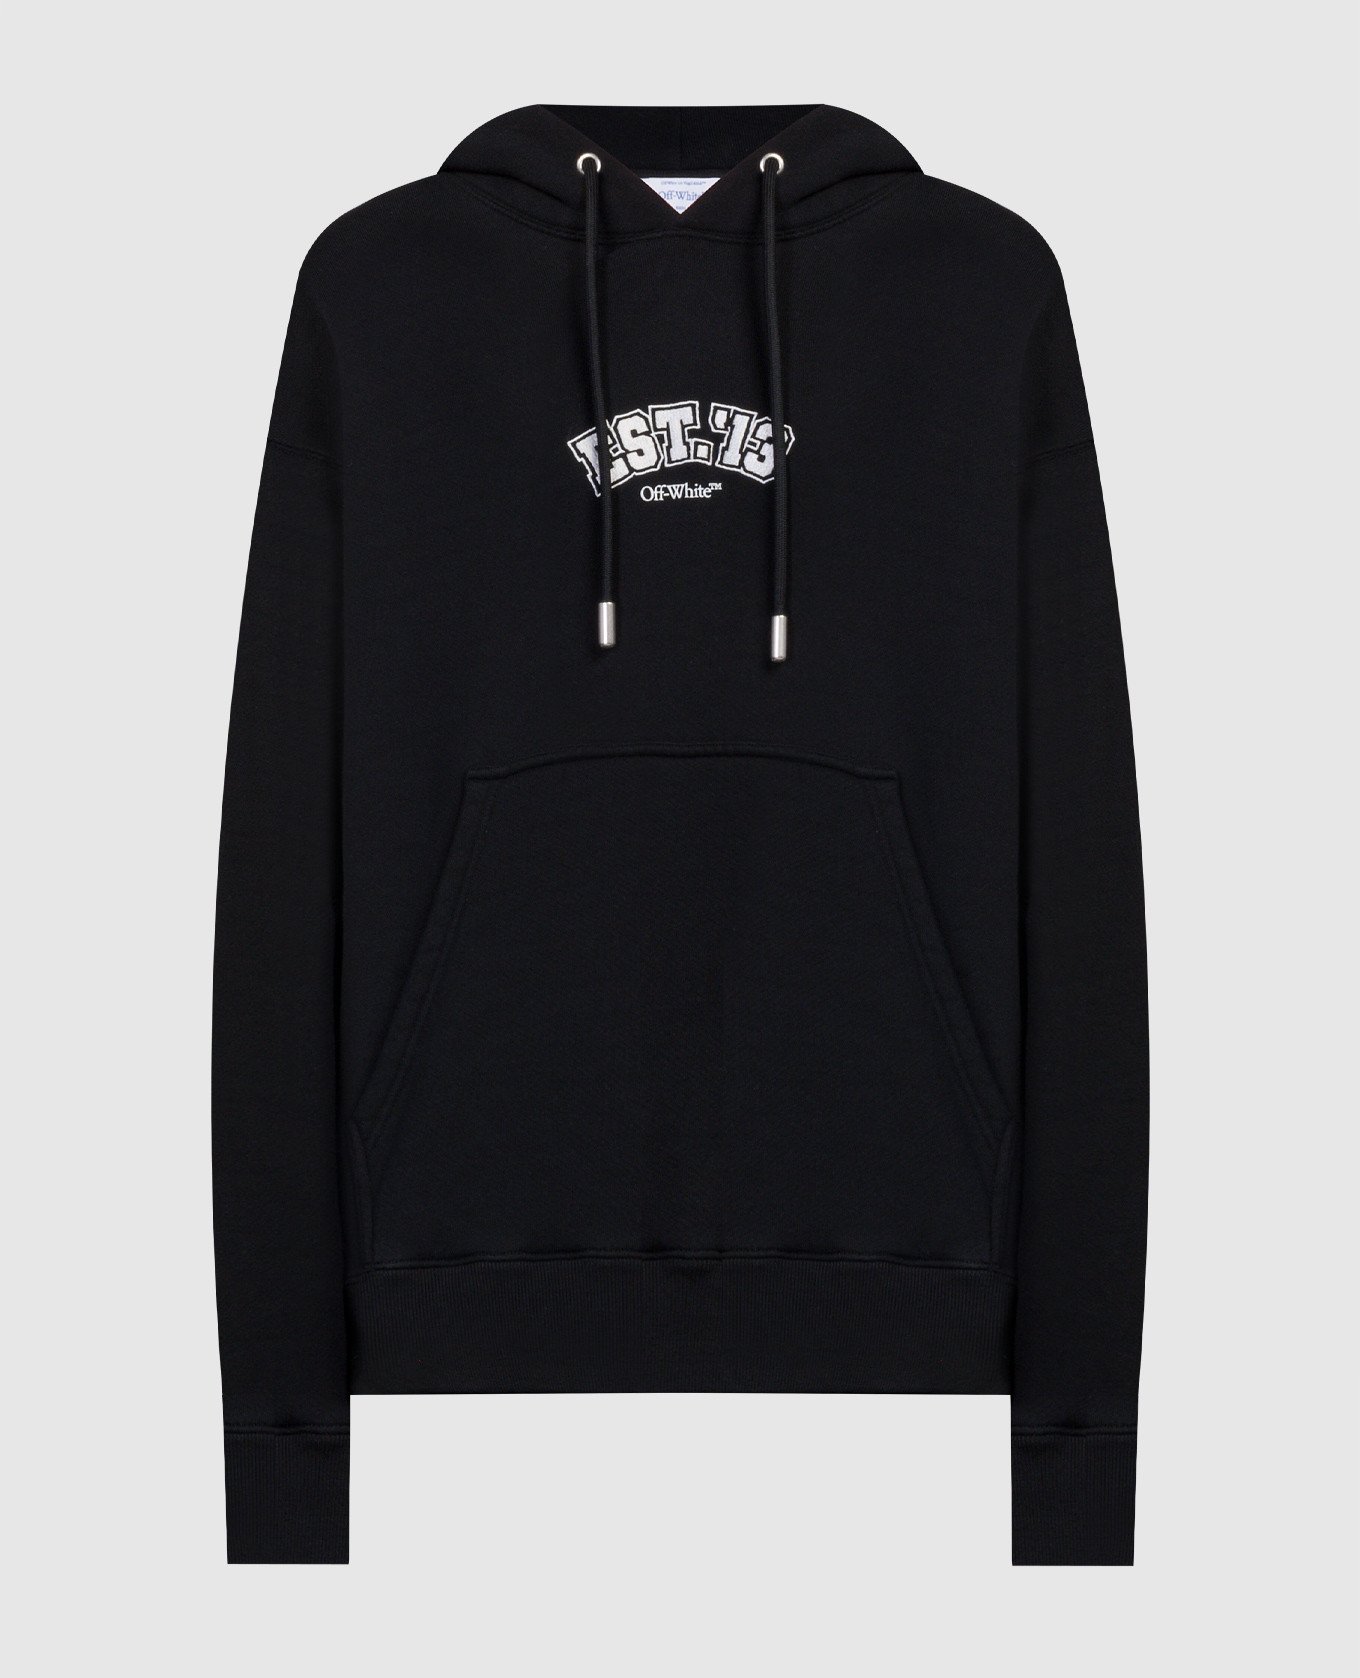 Logic black hoodie with embroidery and print